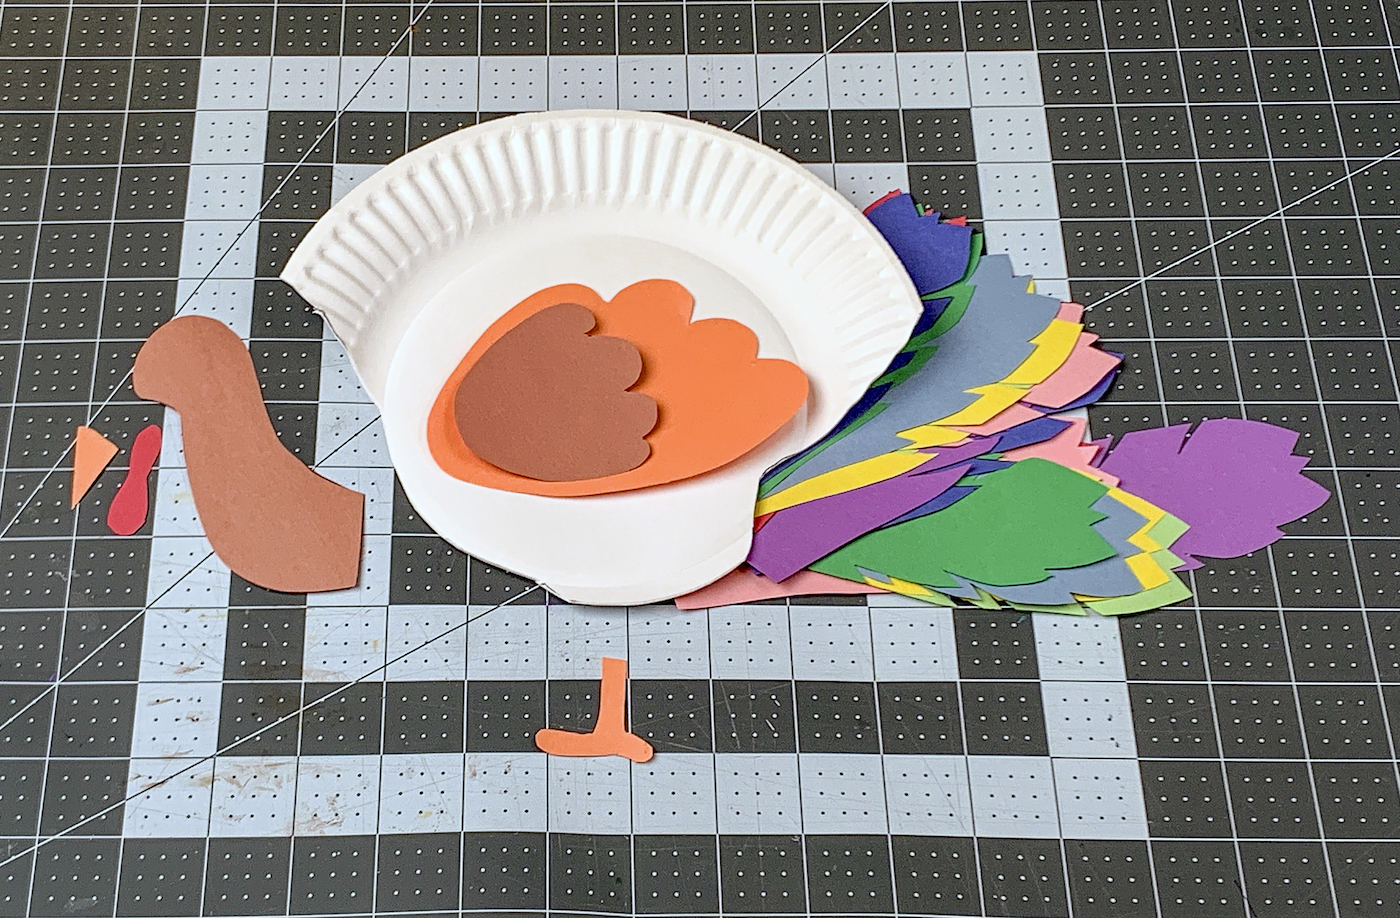 Feathers, paper plate, and turkey parts cut out of paper and assembled on the mat